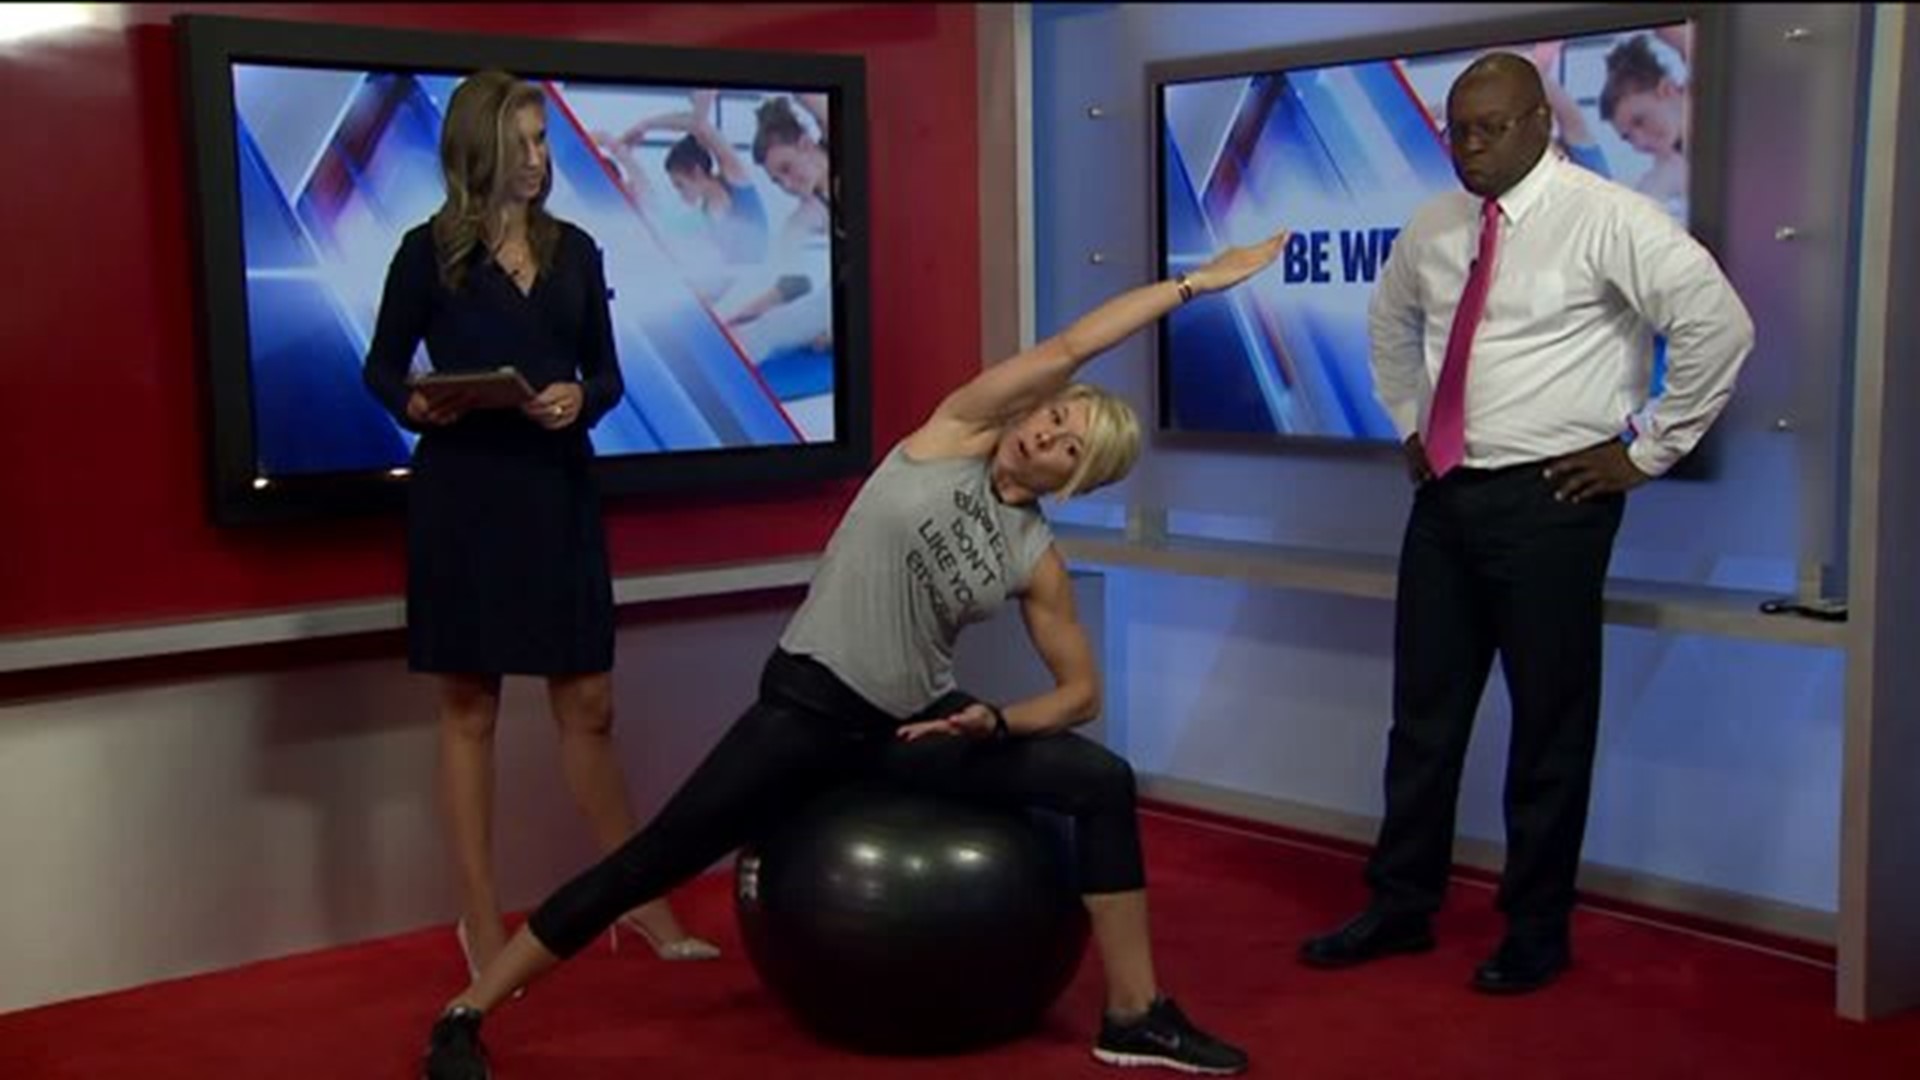 Be Well: Strengthen your core with stability ball training